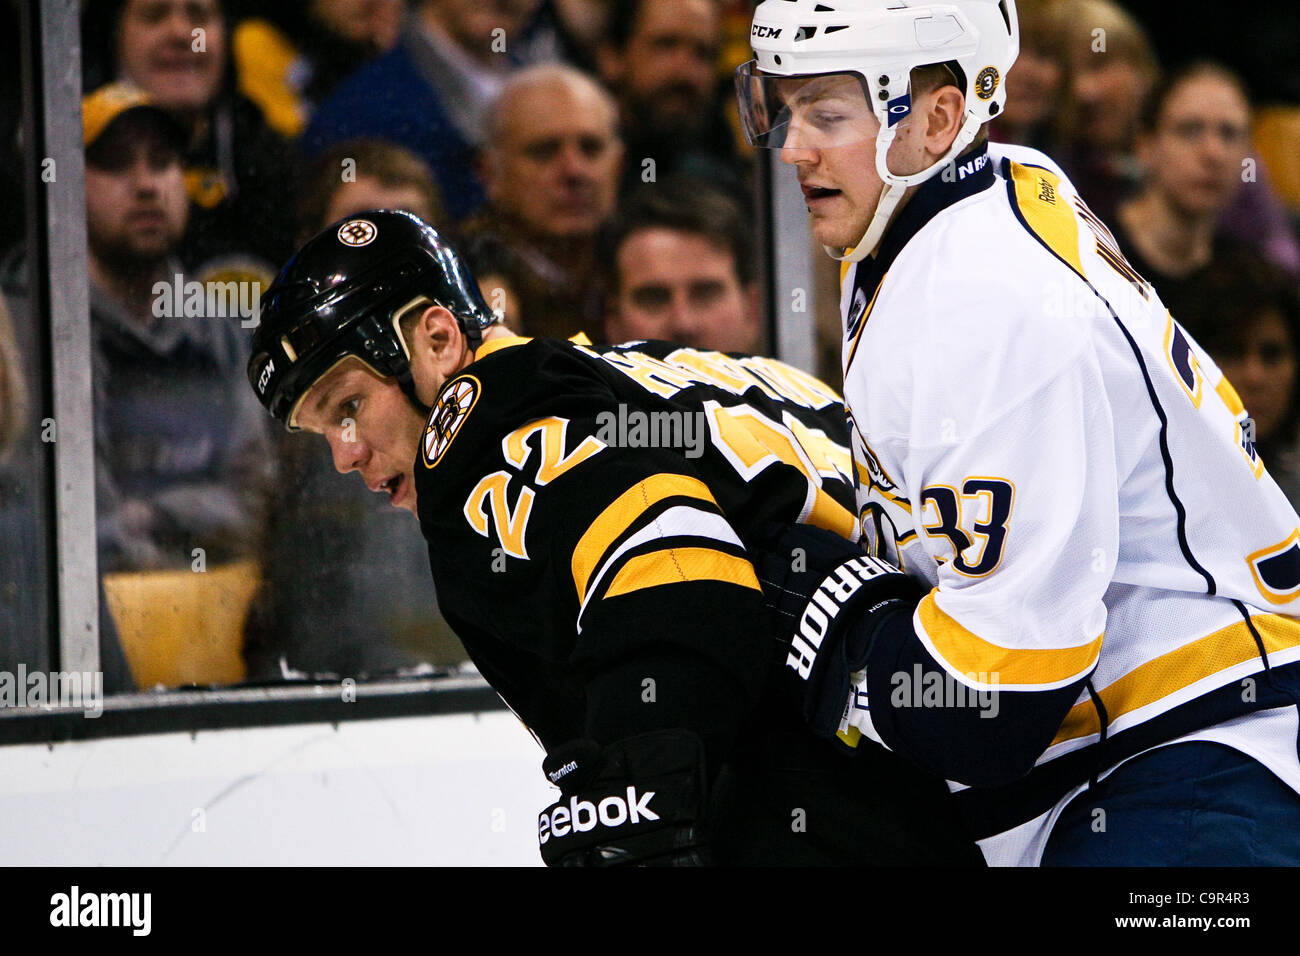 Shawn Thornton's 7 Most Memorable Moments as a Boston Bruin